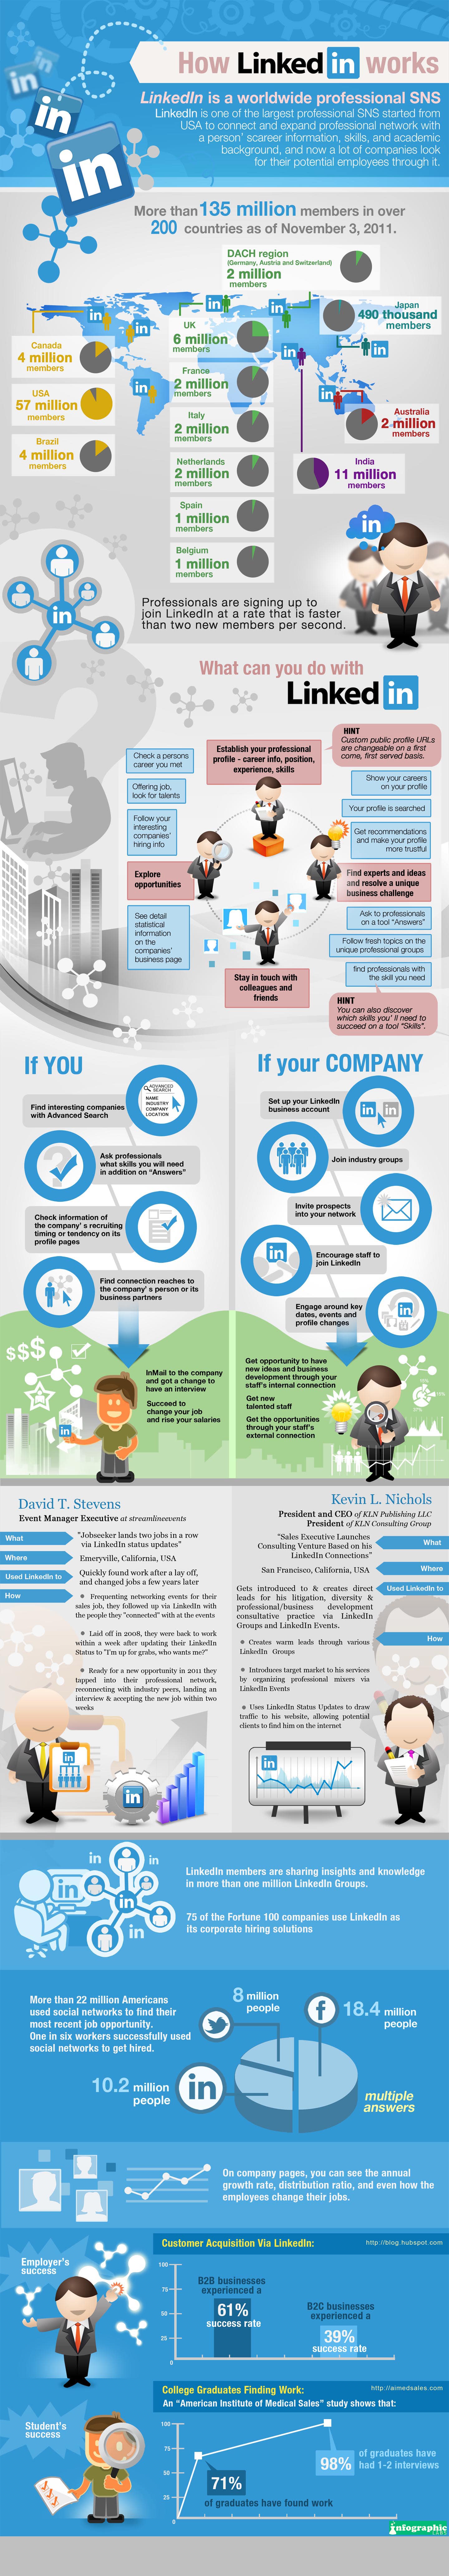 Linkedin Guide How It Works Infographic